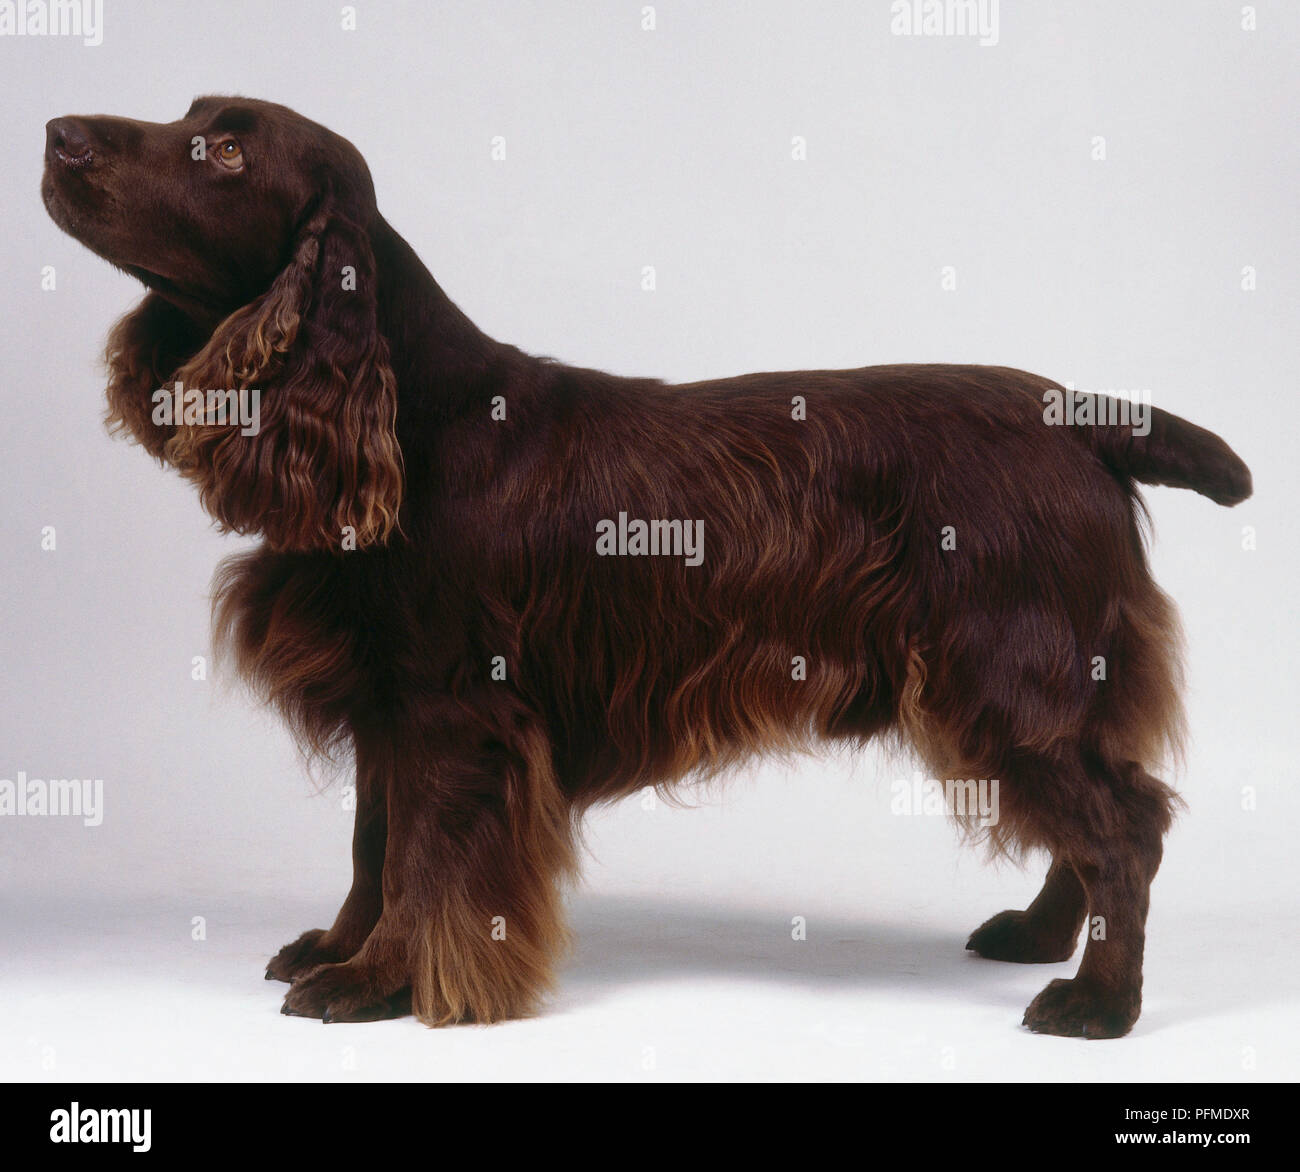 A field spaniel with a deep reddish-brown coat stands with its head tilted upward. Stock Photo